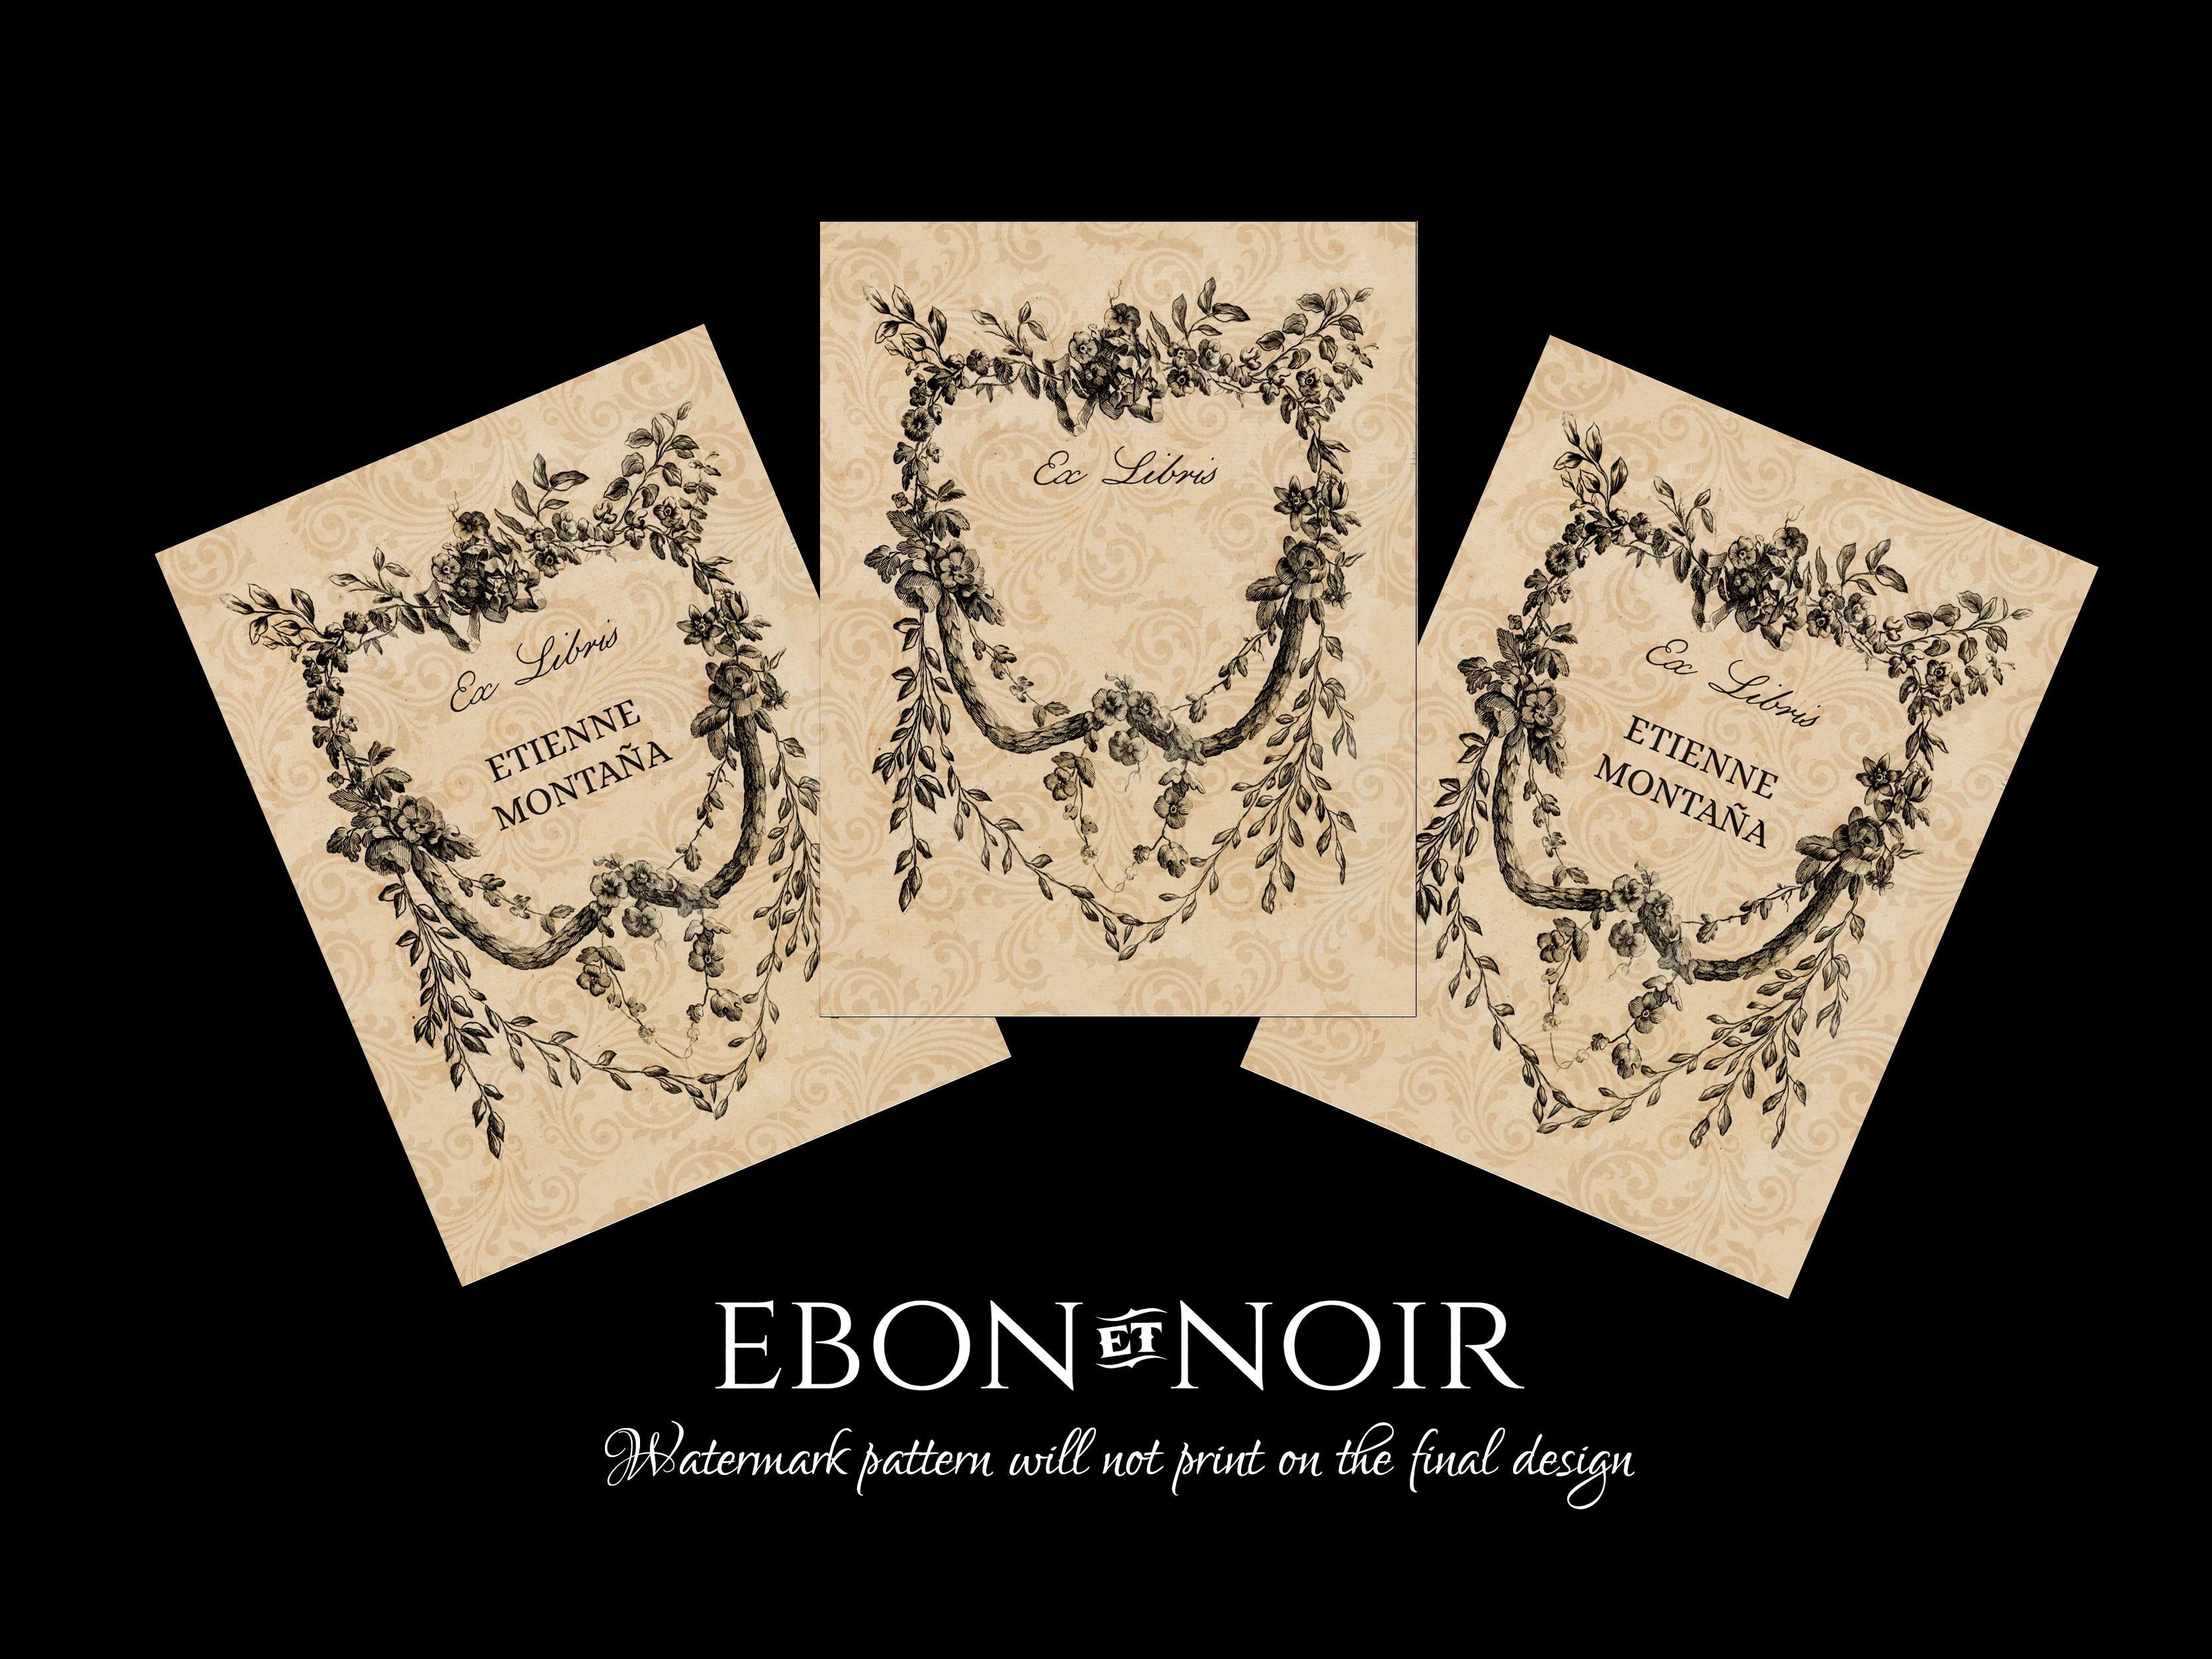 French Label, Personalized Ex-Libris Bookplates, Crafted on Traditional Gummed Paper, 3in x 4in, Set of 30